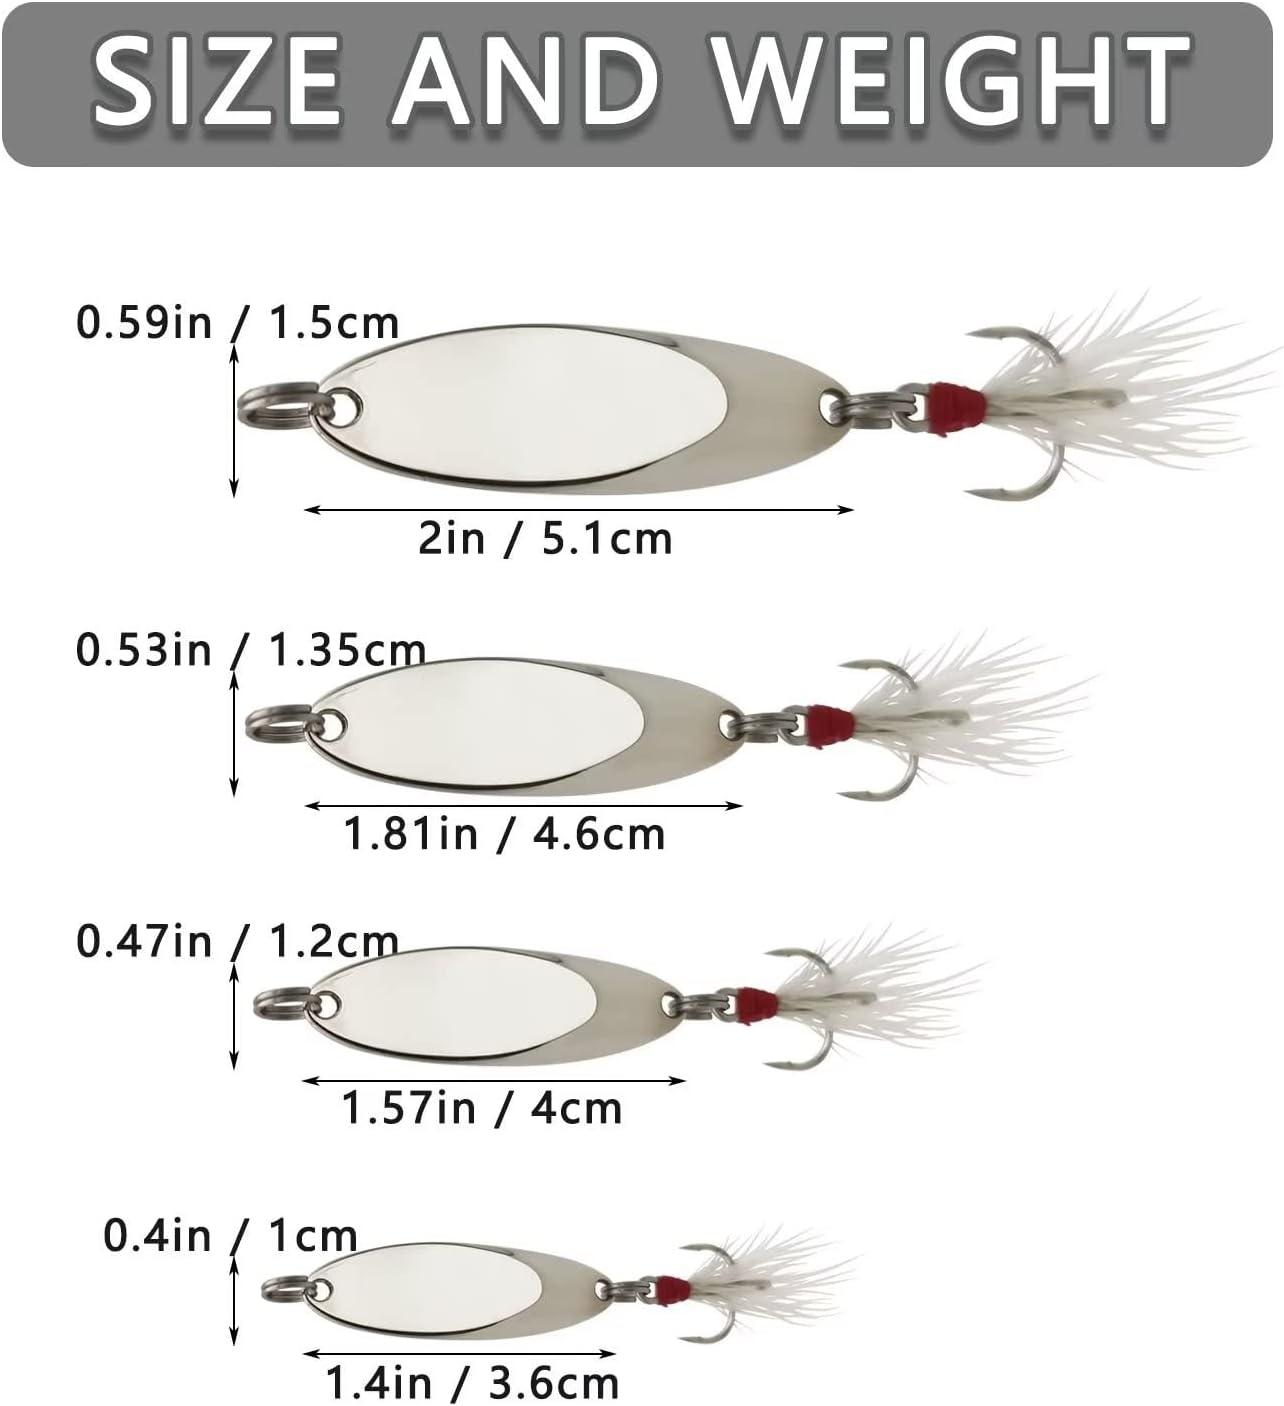 CWSDXM Fishing Spoons Fishing Lures Casting Spoon Metal Jig Lure Trout Lures for Freshwater/Saltwater, Reflective Spoons Bait with Treble Hooks